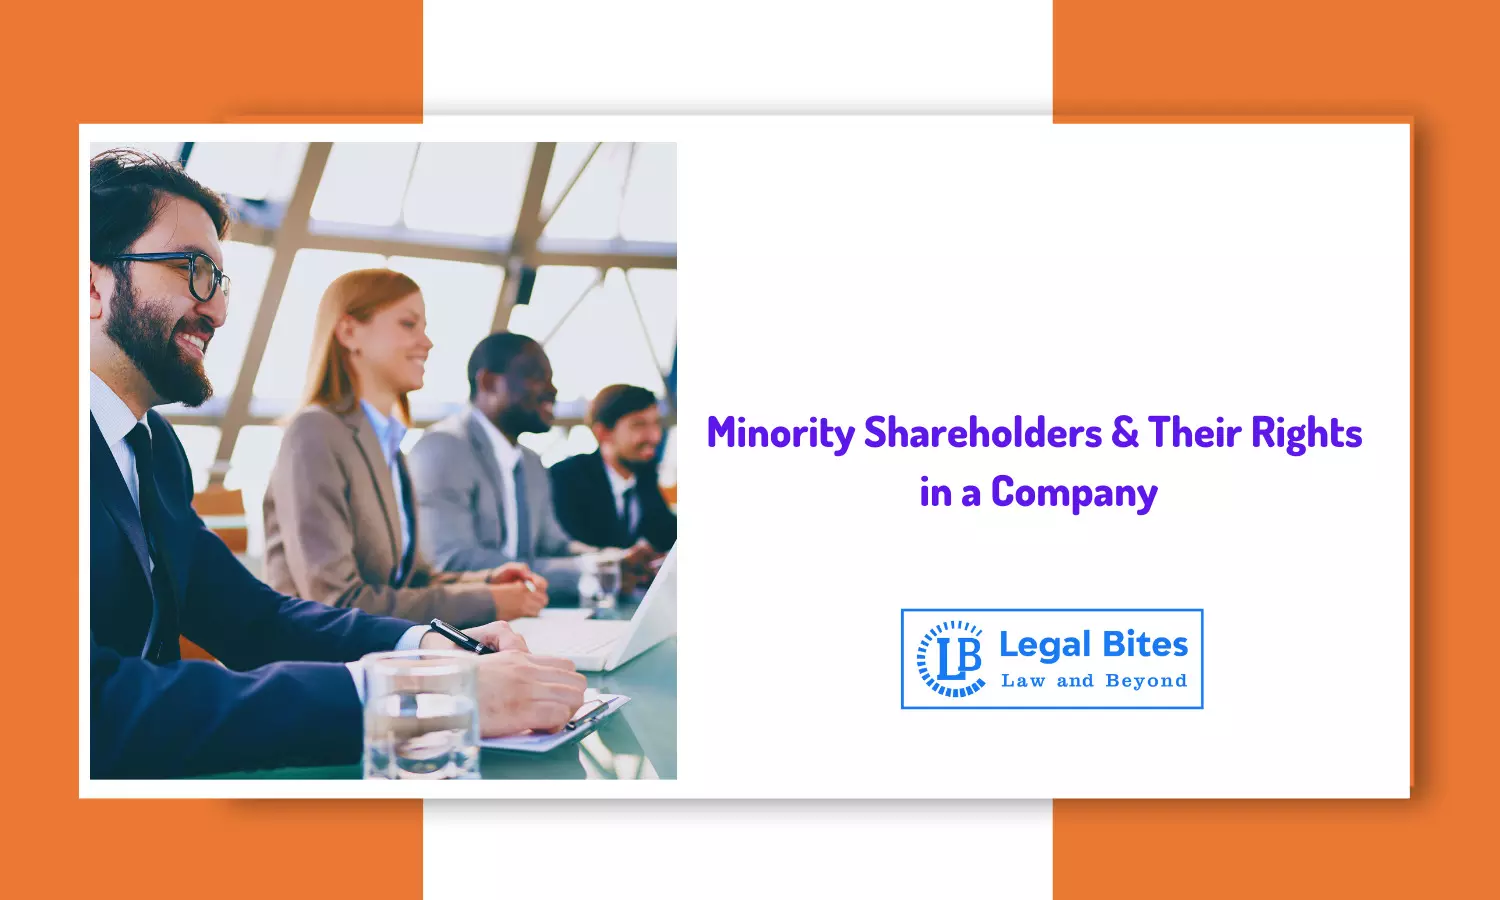 Minority Shareholders & Their Rights in a Company